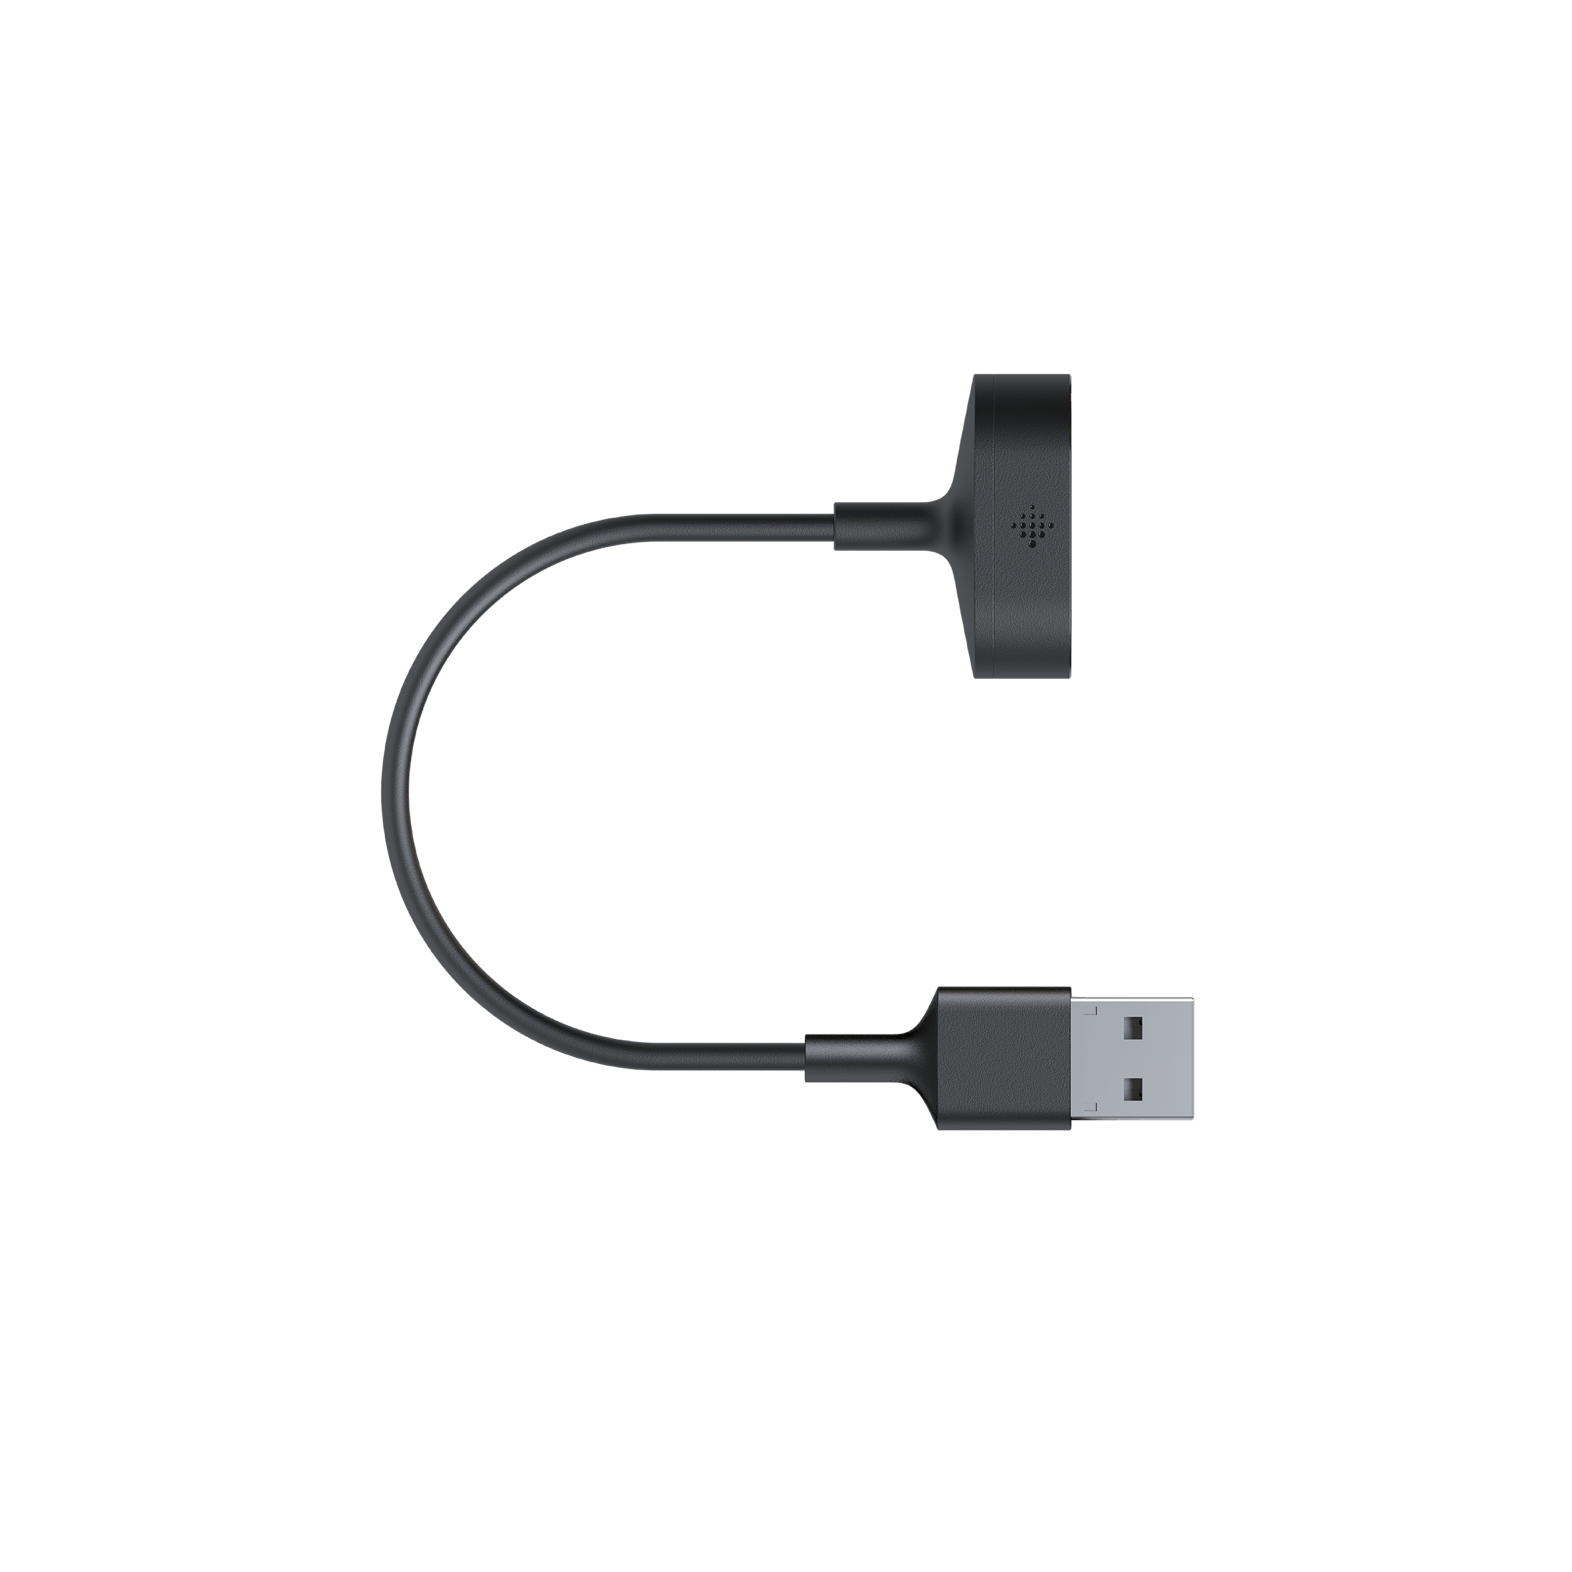 Ace Alta HR/ Blaze Ionic inspire USB Charger Cable Lead For Fitbit Versa 